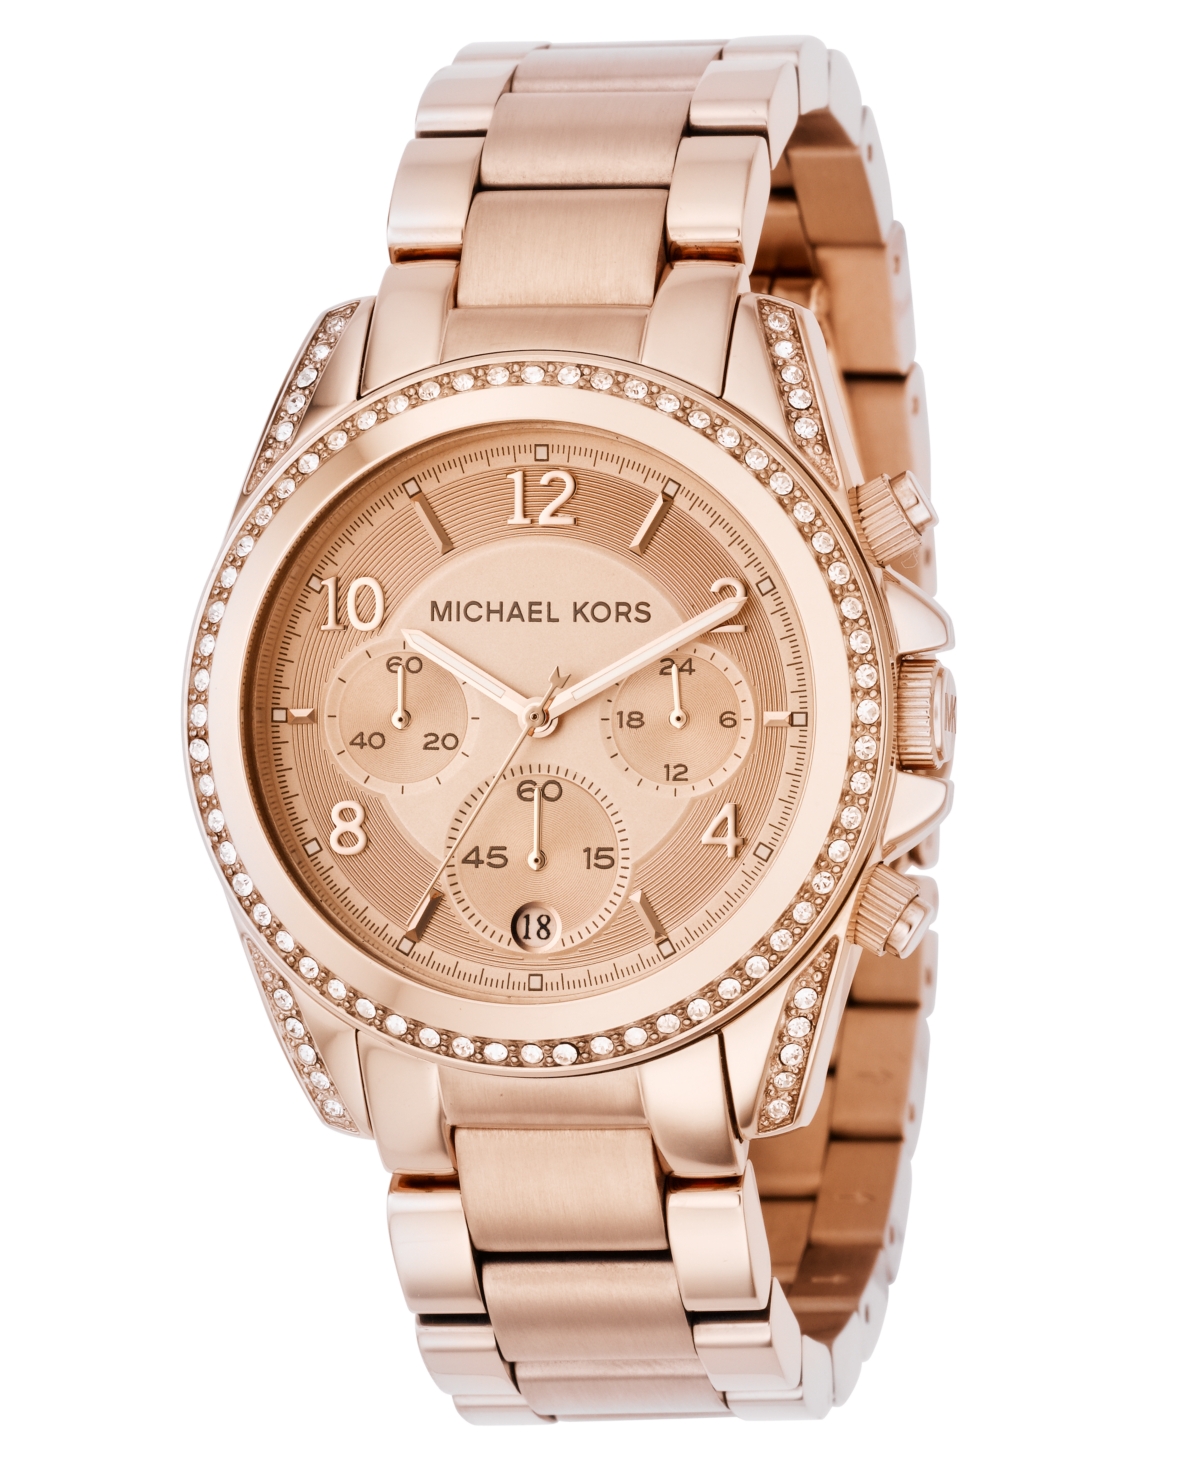 Michael Kors Women's Blair Rose Gold-Tone Stainless Steel Bracelet Watch  41mm & Reviews - All Watches - Jewelry & Watches - Macy's